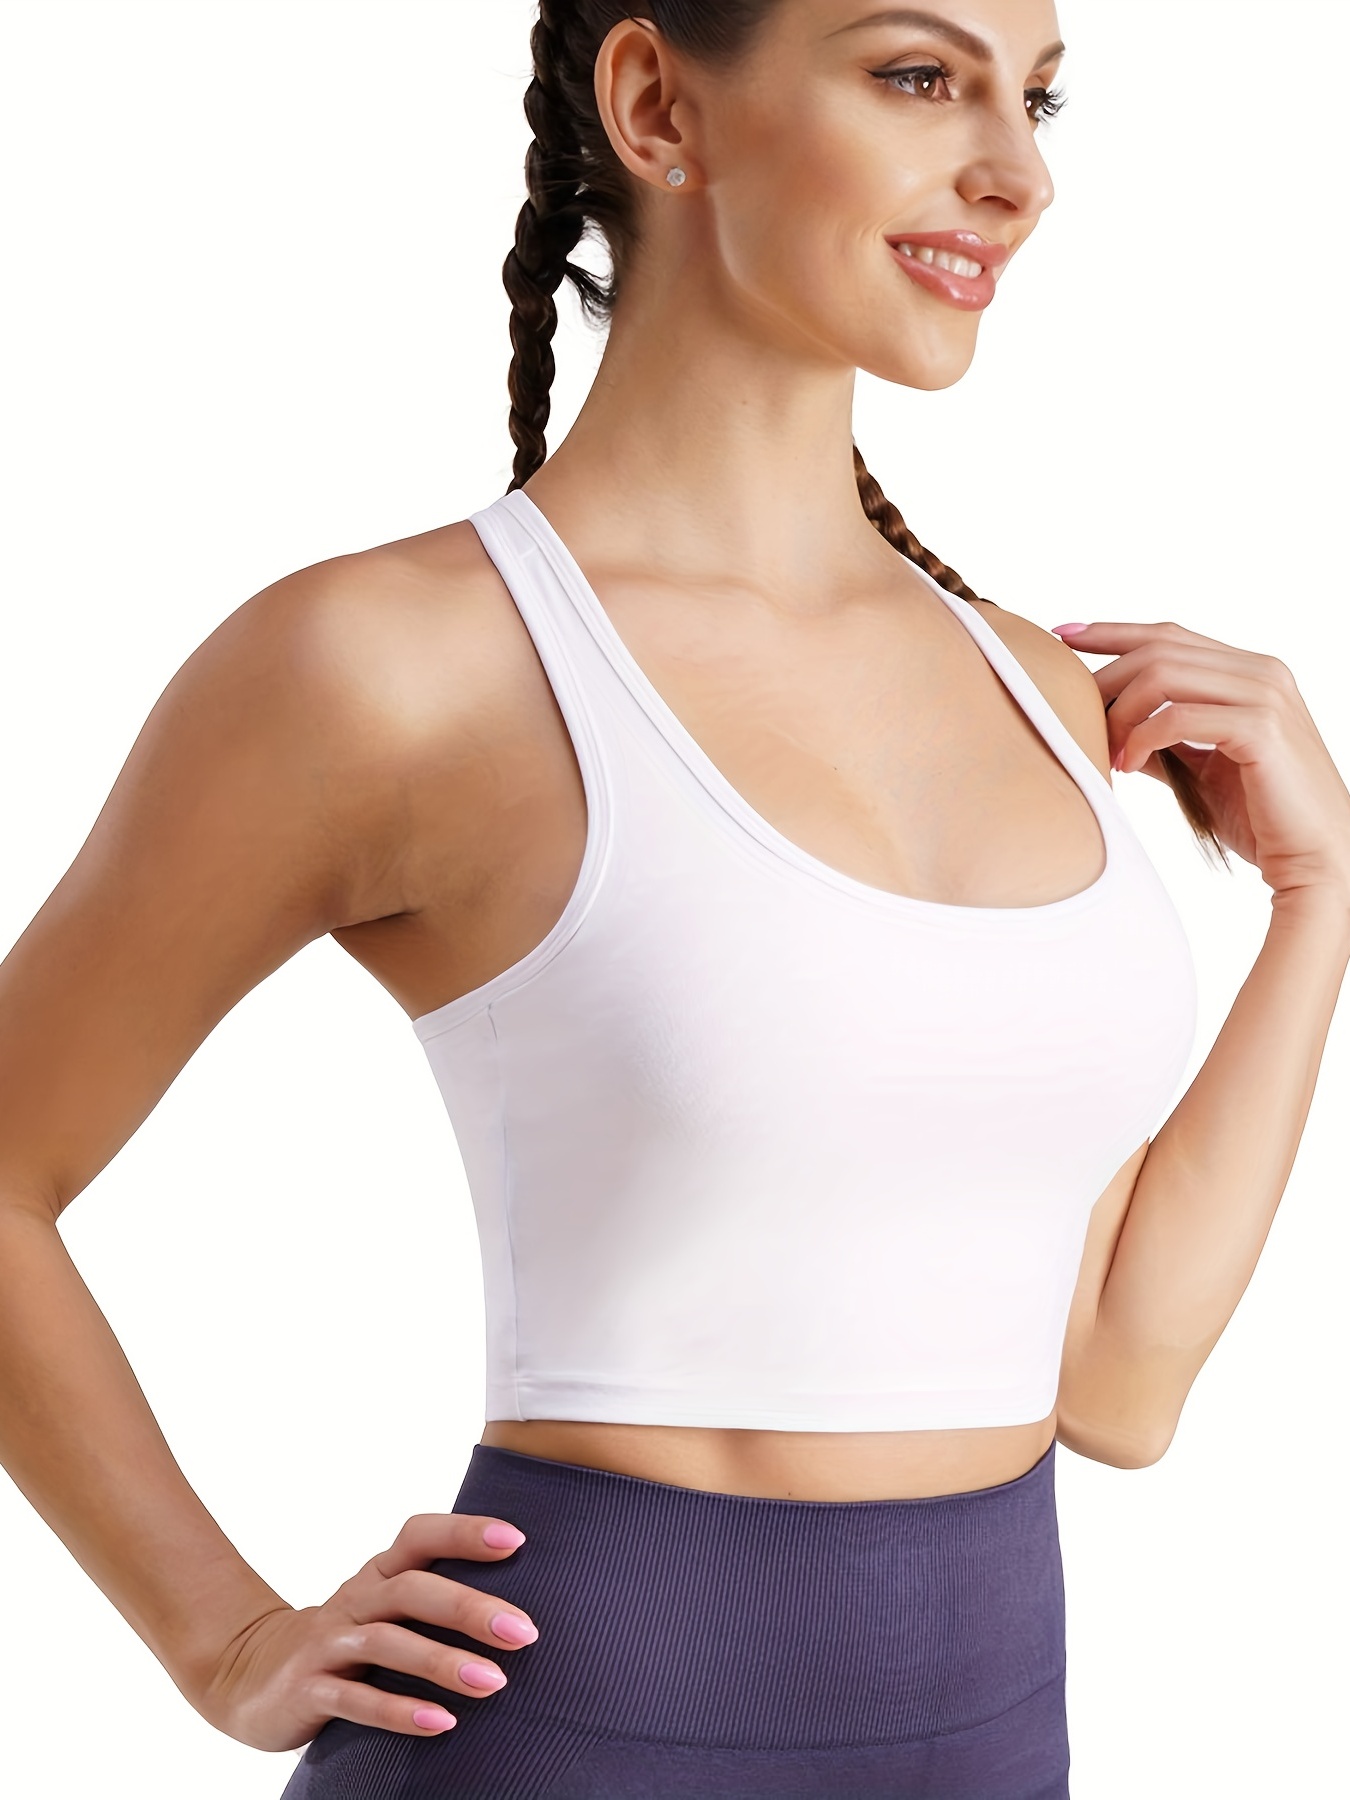 THE GYM PEOPLE Womens' Sports Bra Longline Wirefree Padded with Medium  Support s